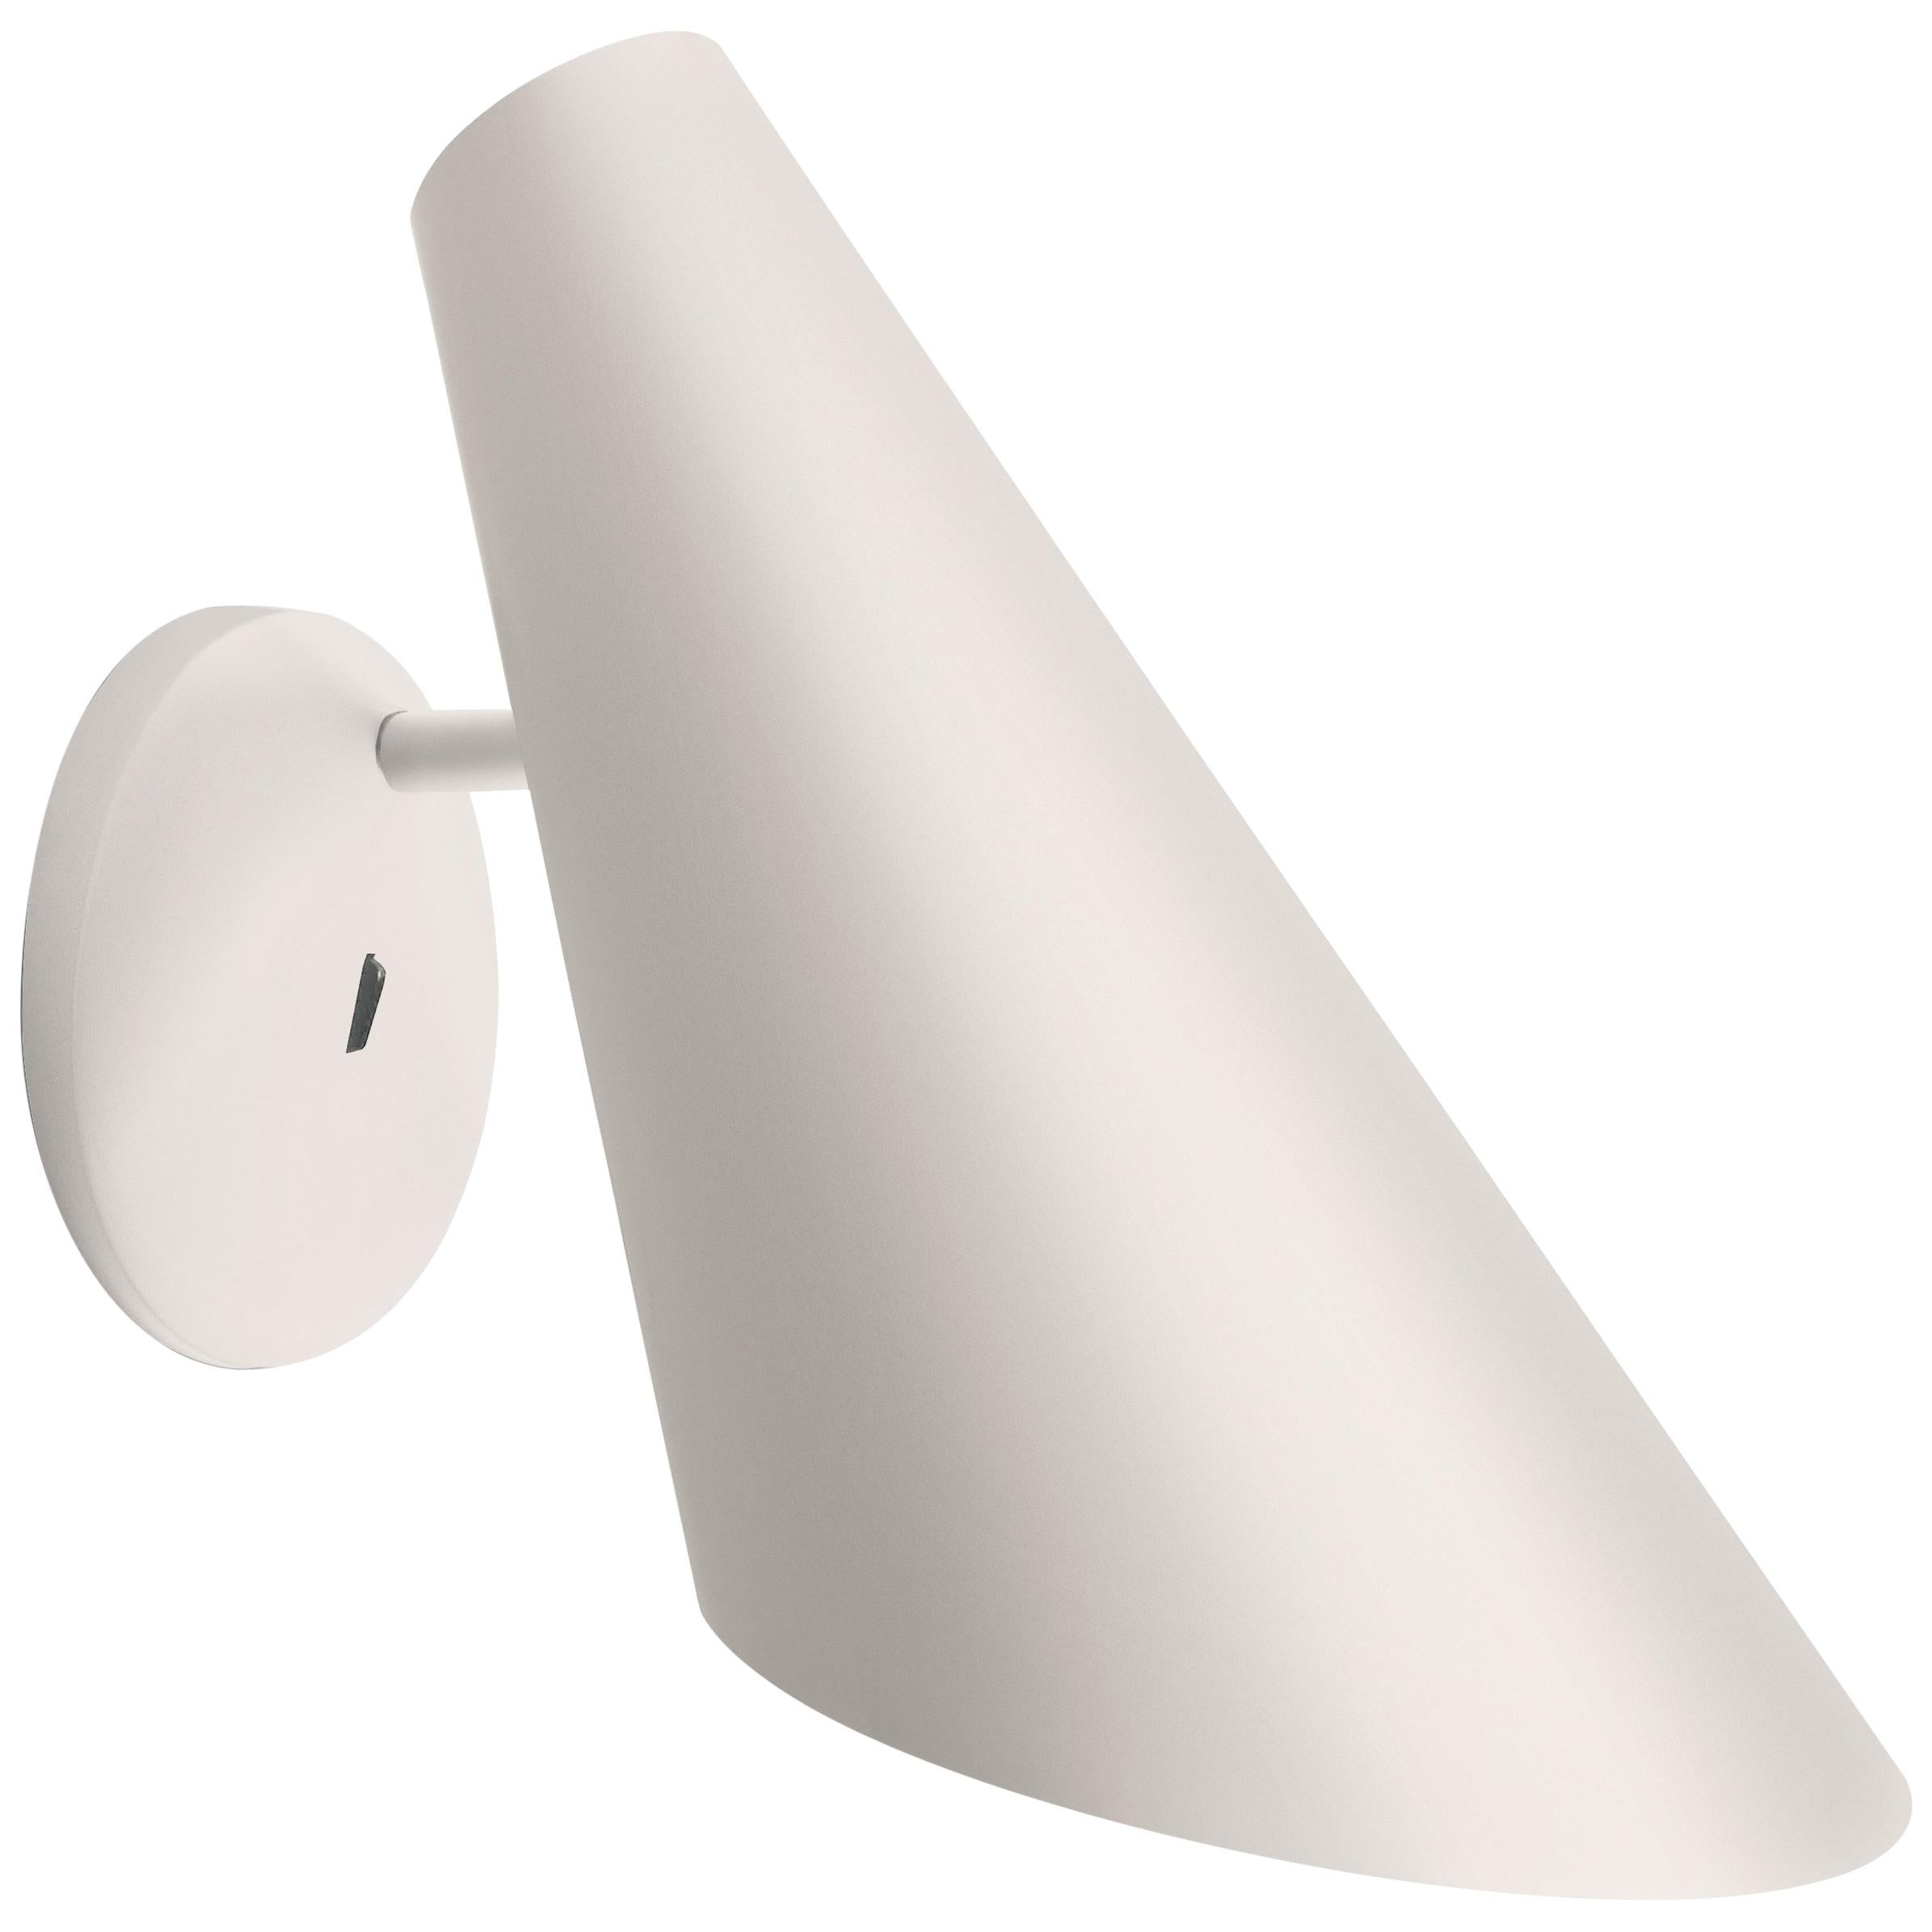 I.Cono 11" Wall Lamp in White by Lievore, Altherr & Molina For Sale